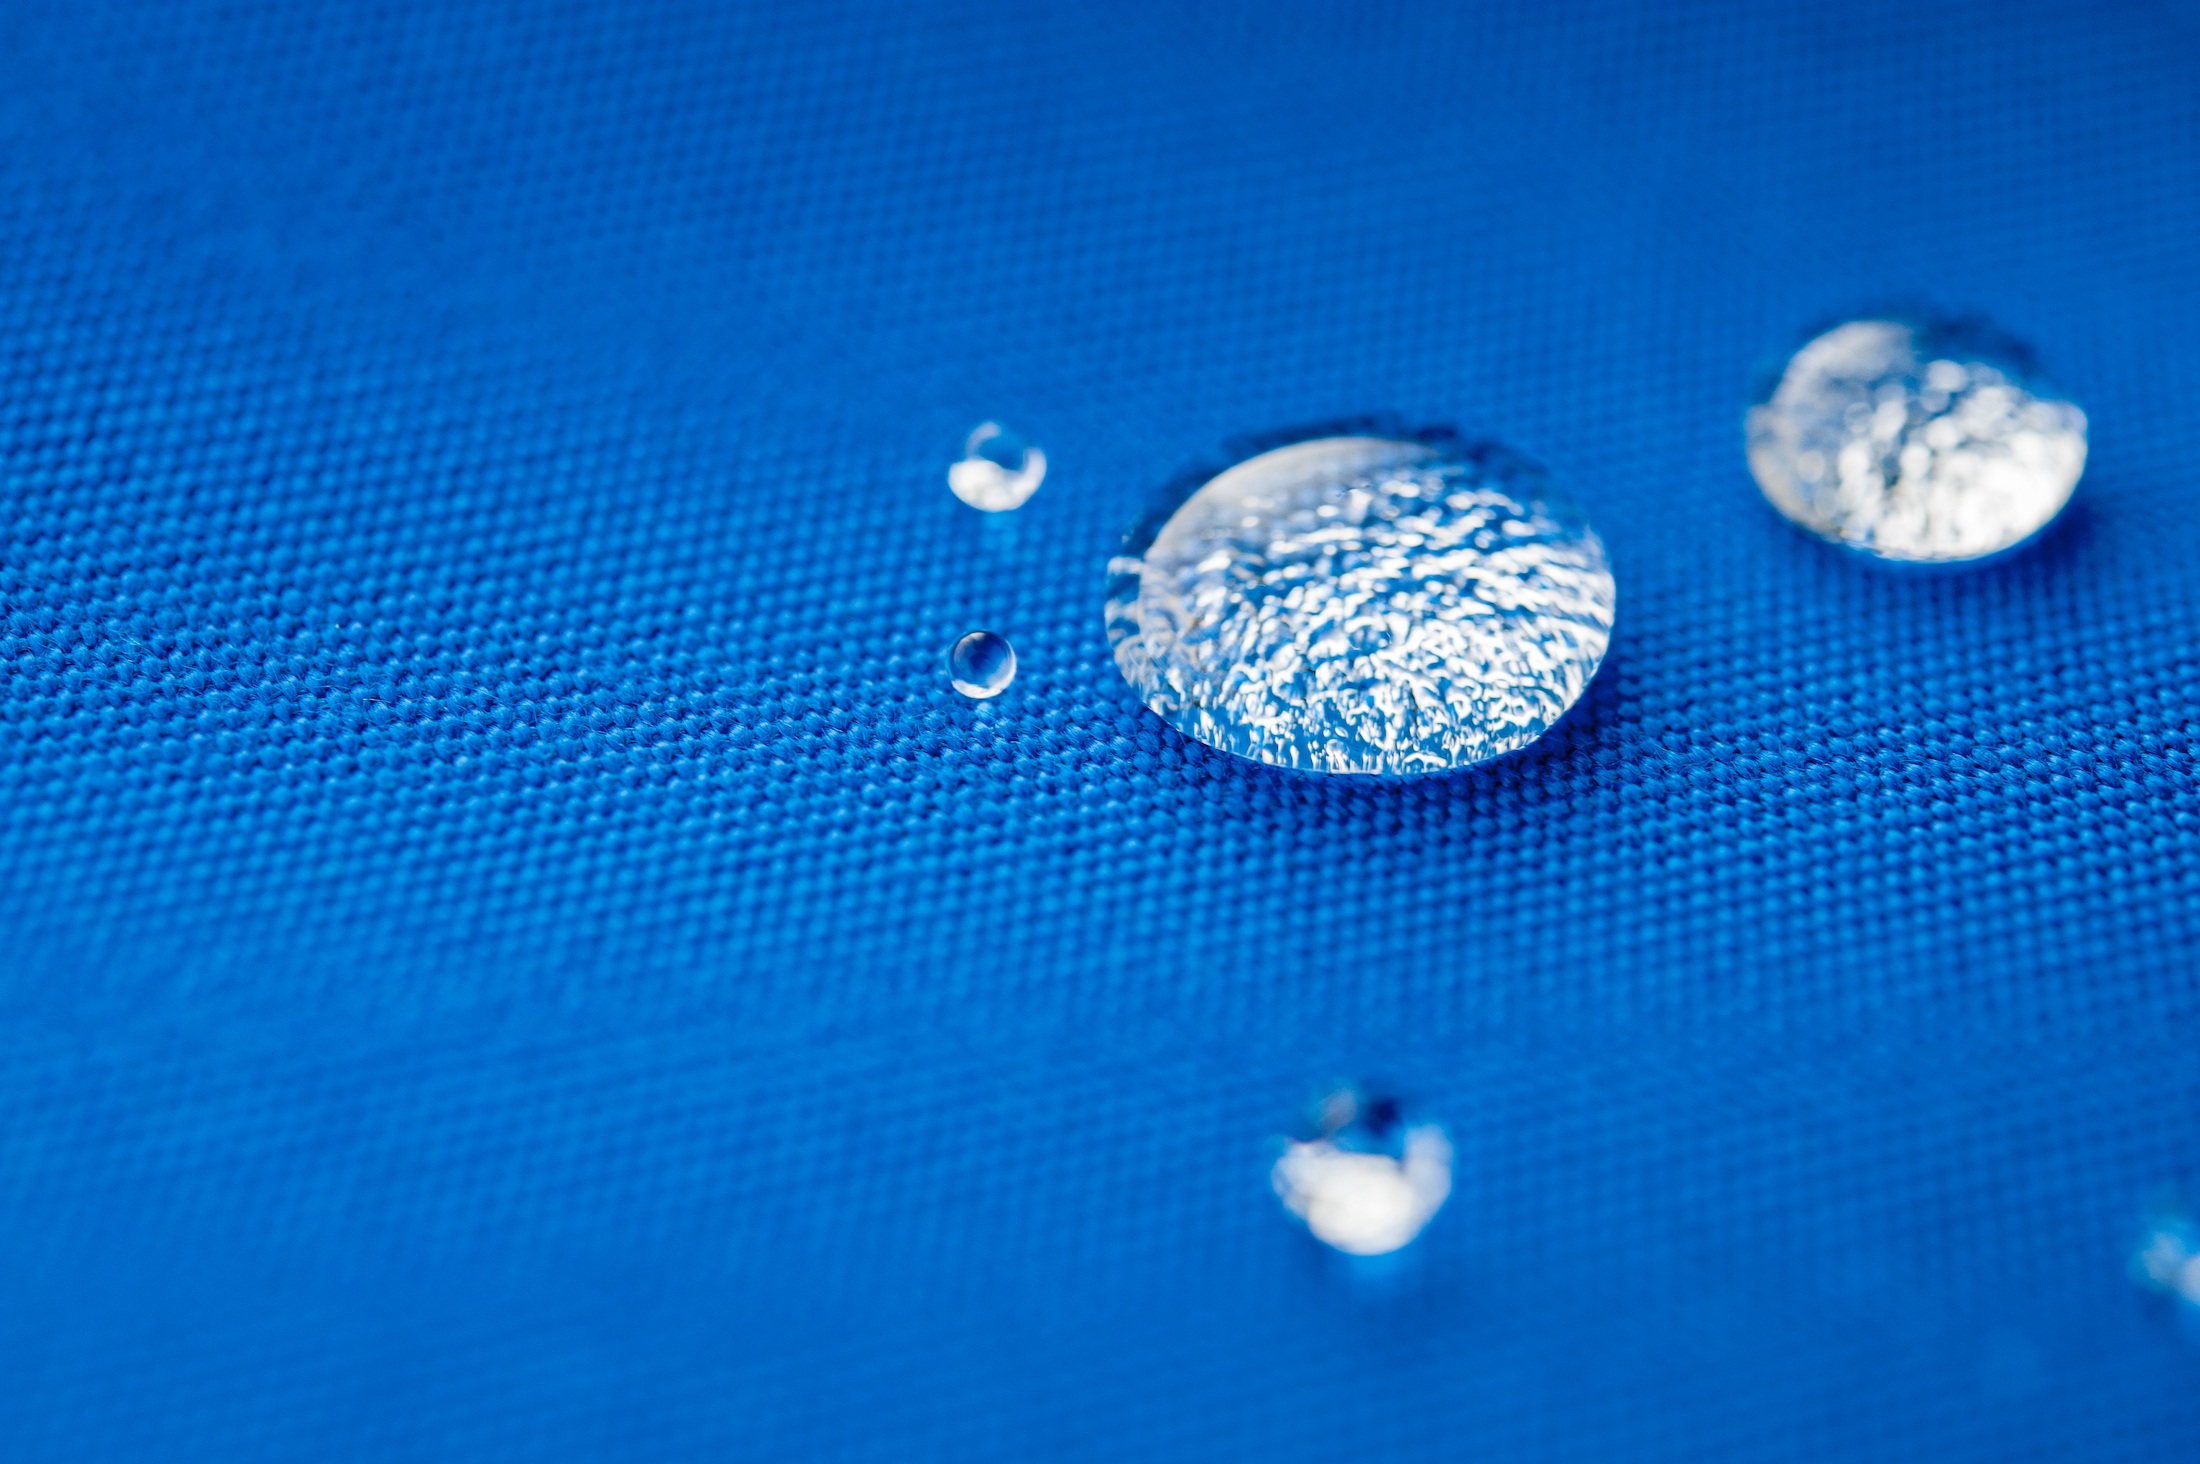 Canvas Fabric several different of water repellent and waterproof fabrics. How to waterproof fabric with these simple instructions for Experiment by drop water on it.